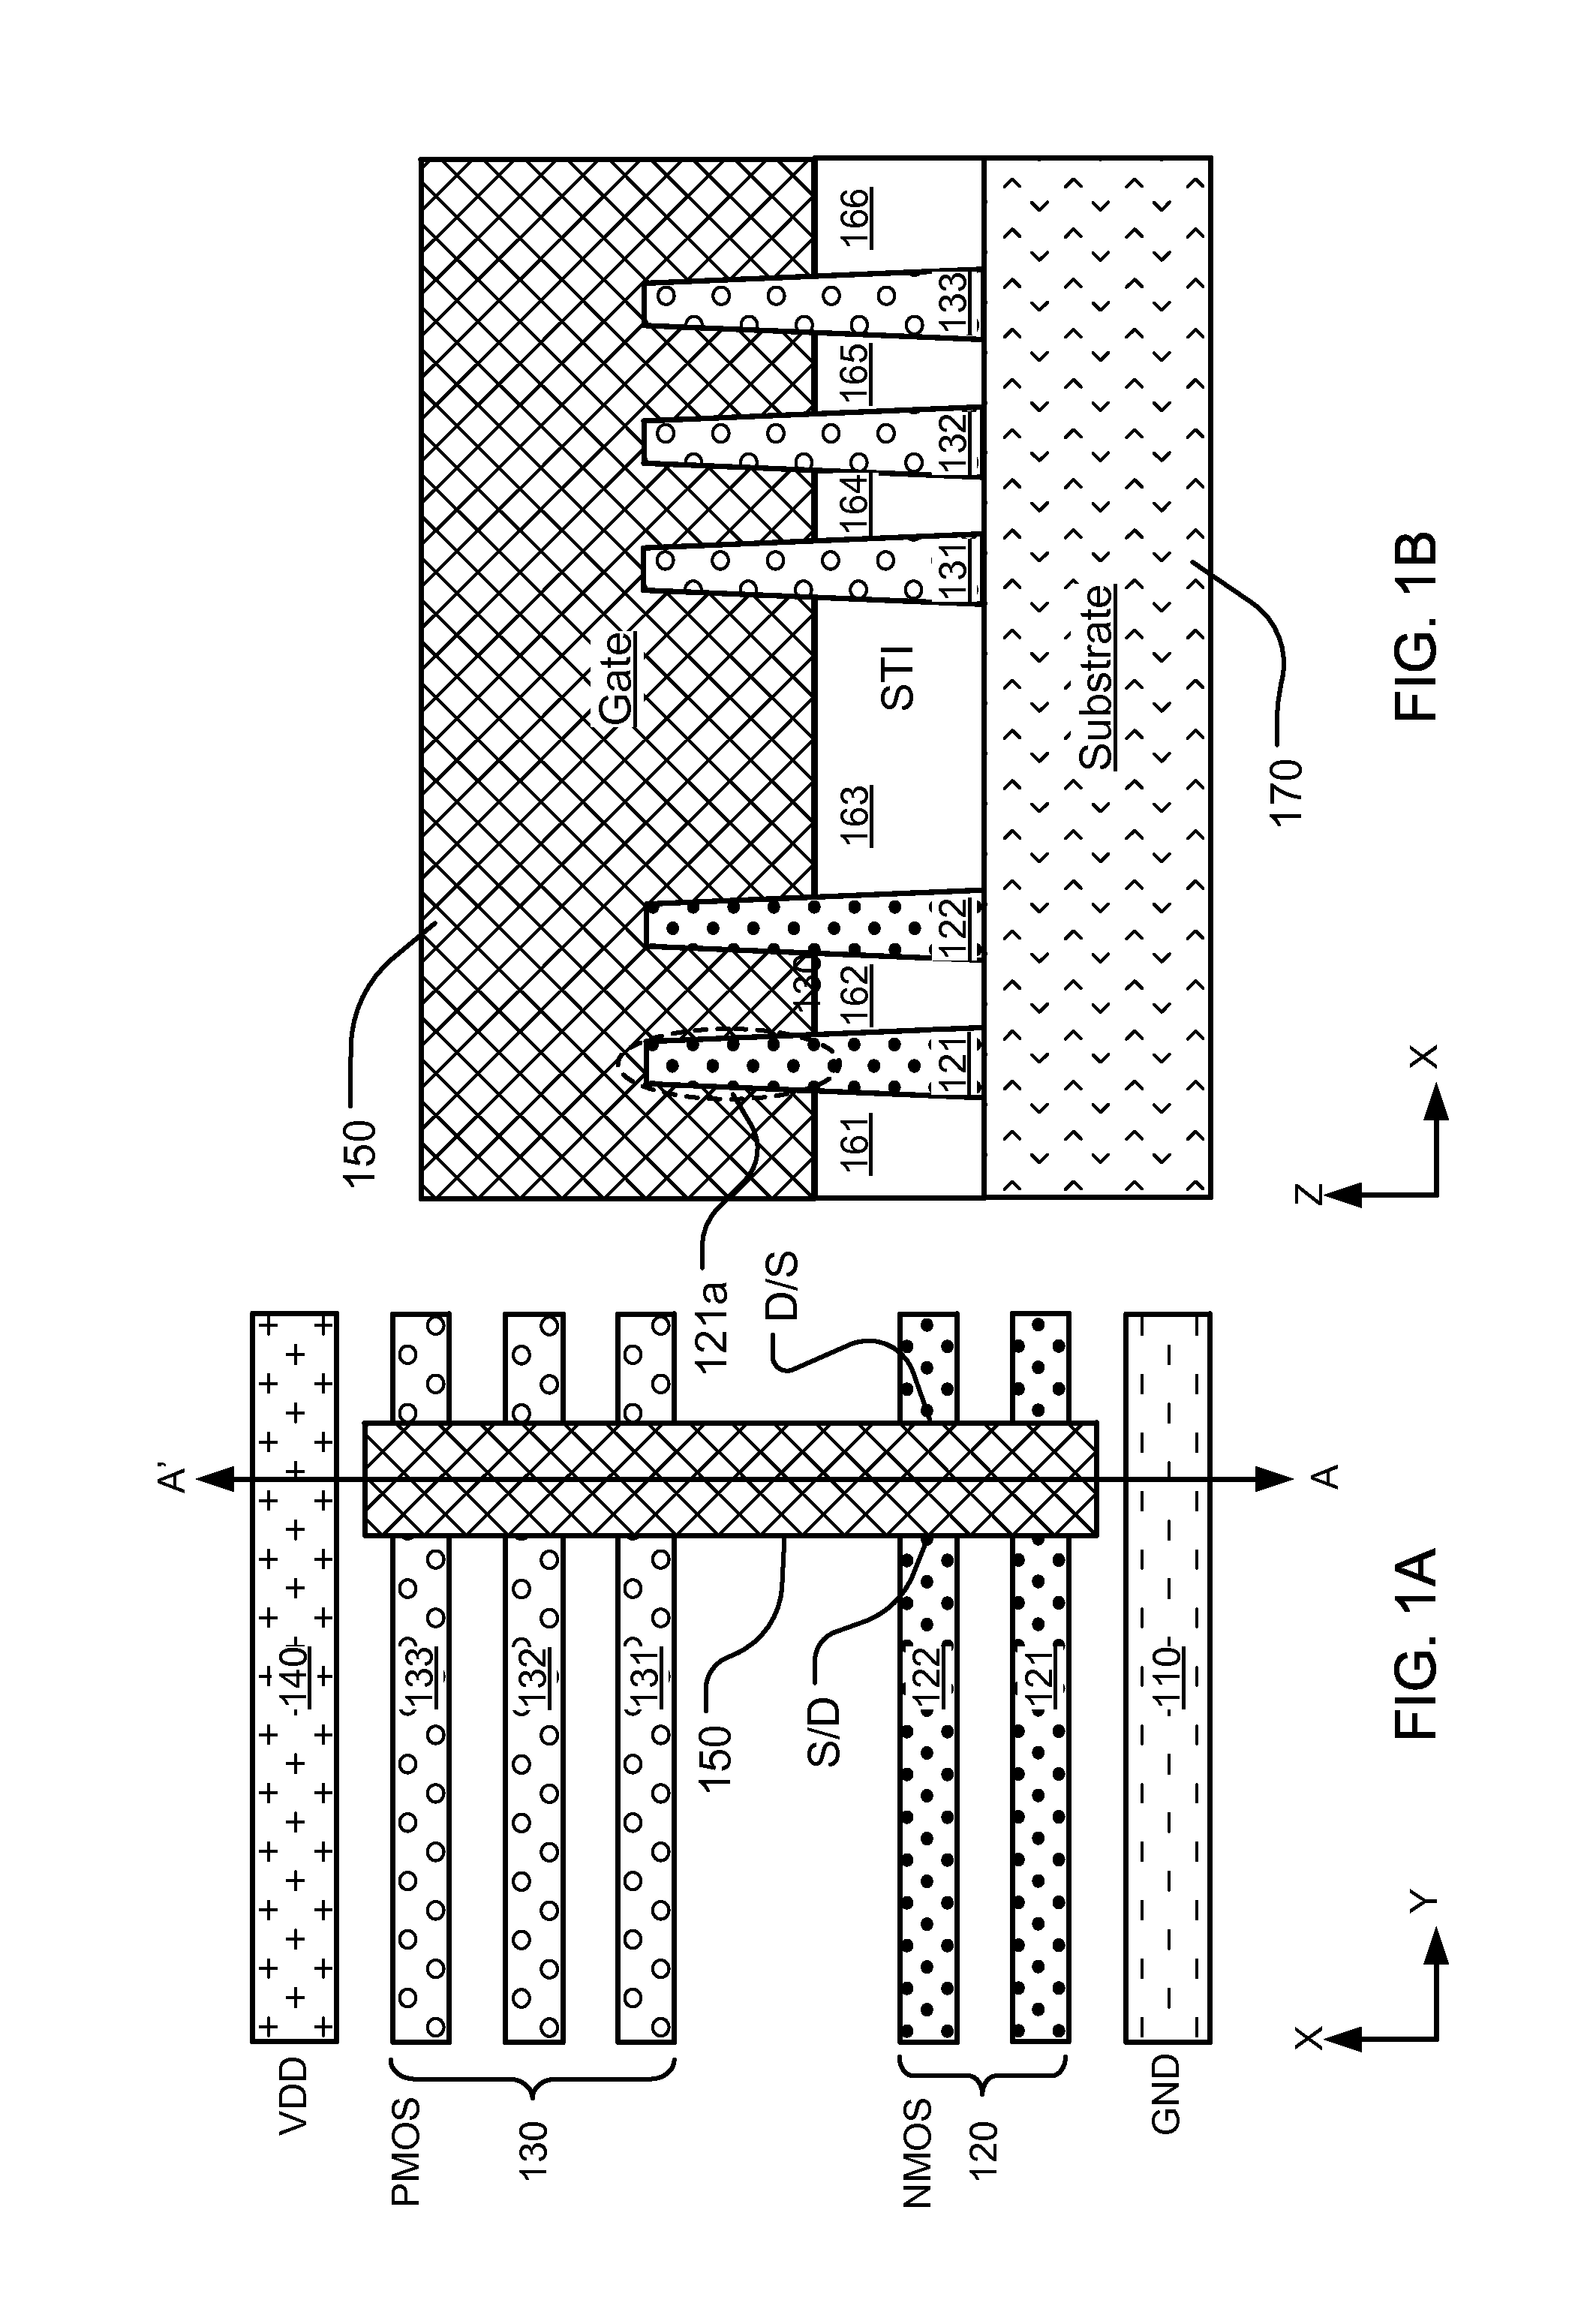 Design tools for integrated circuit components including nanowires and 2d material strips